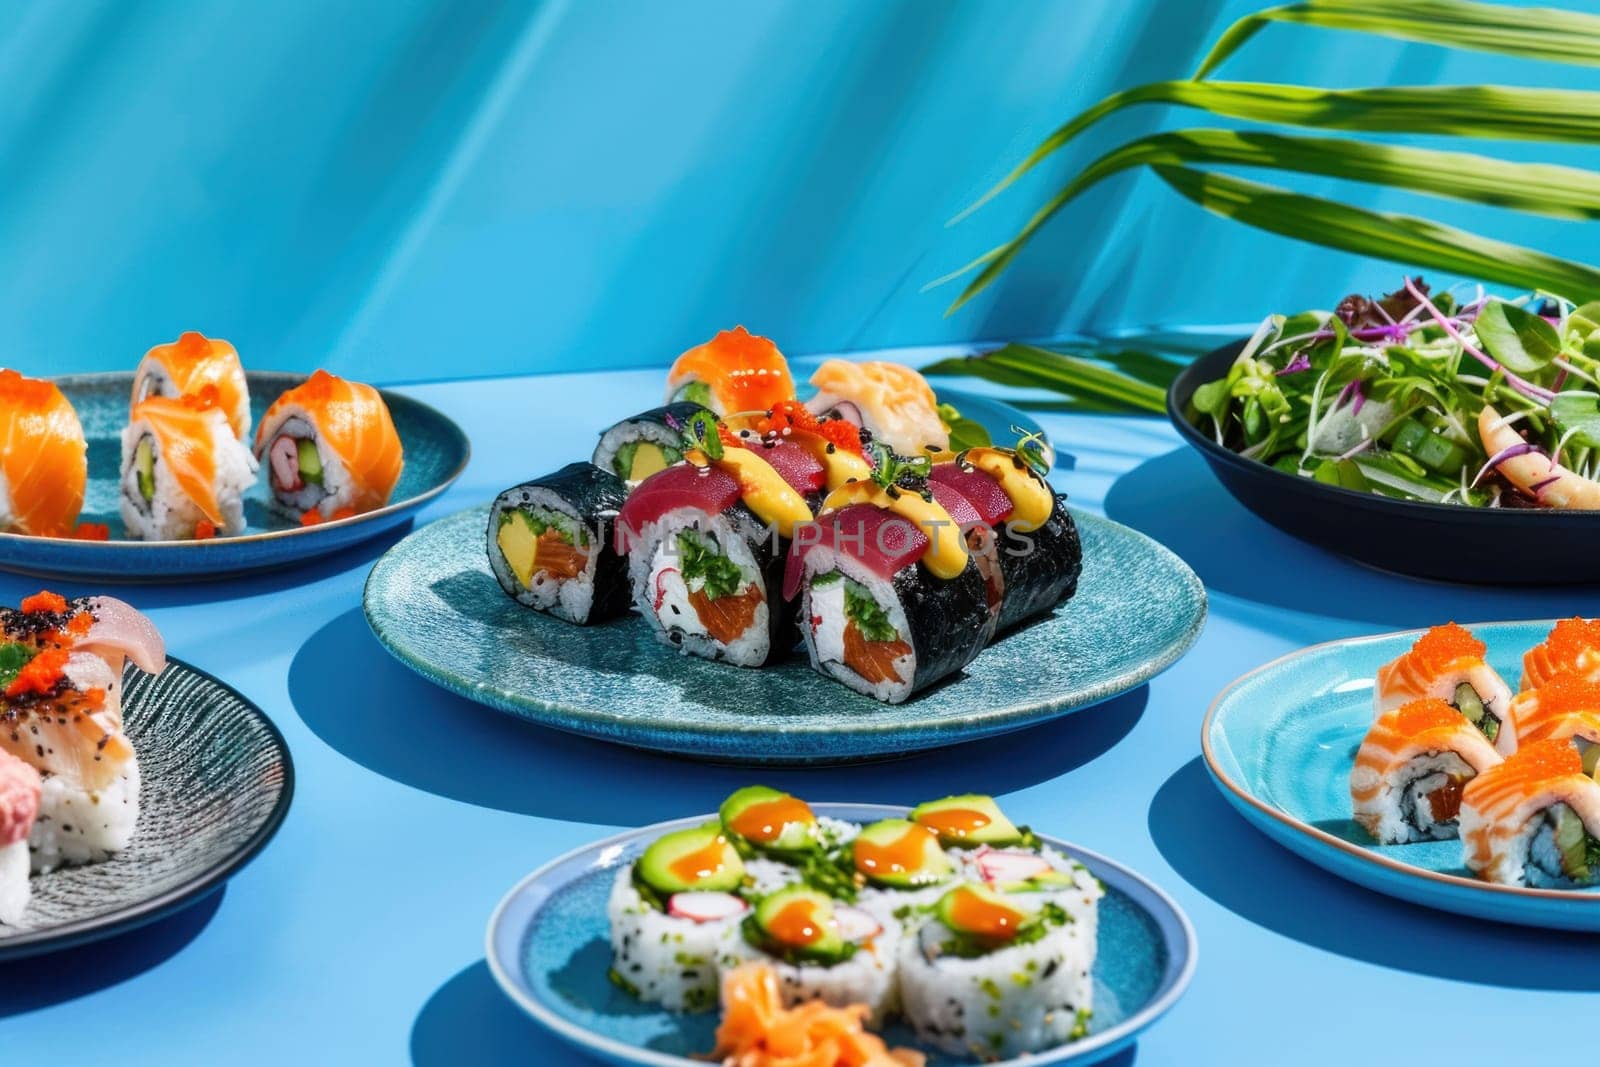 Sushi and other food on blue table with palm trees in background, featuring various culinary delights and tropical atmosphere